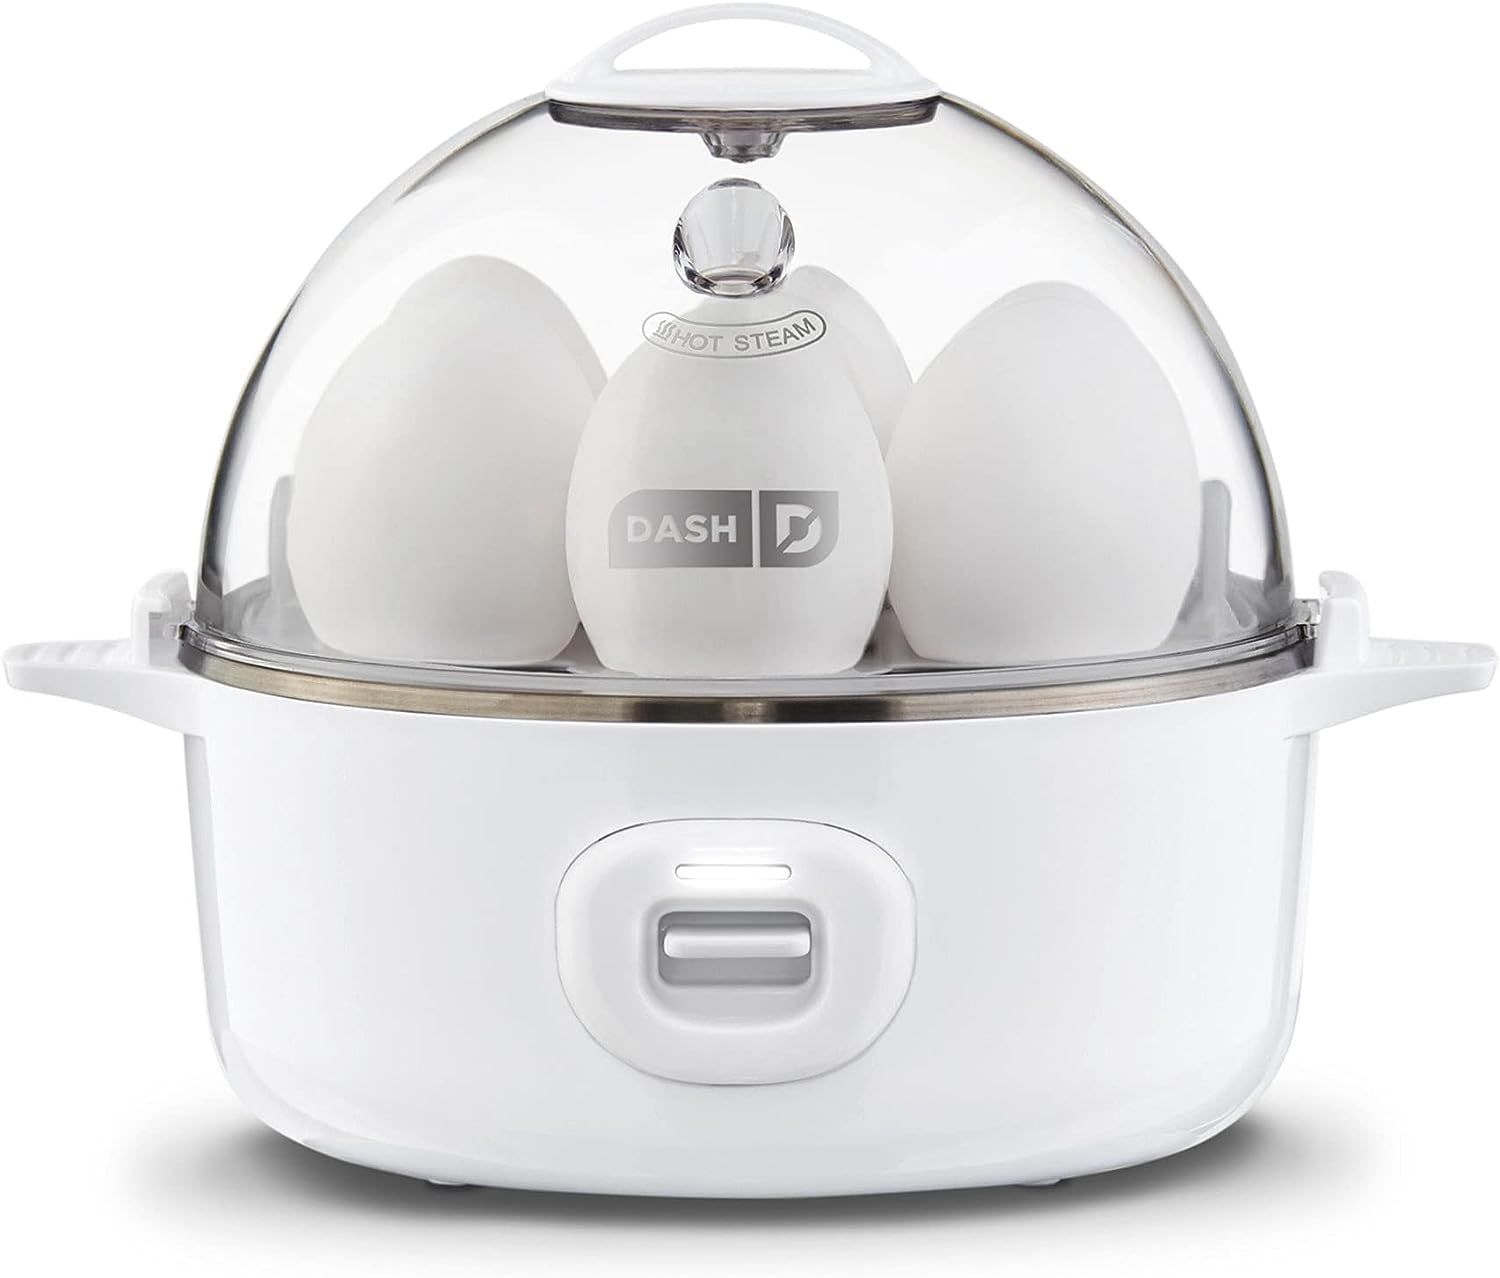 Dash Express Electric Egg Cooker, 7 Egg Capacity for Hard Boiled, Poached, Scrambled, or Omelets ... | Amazon (US)